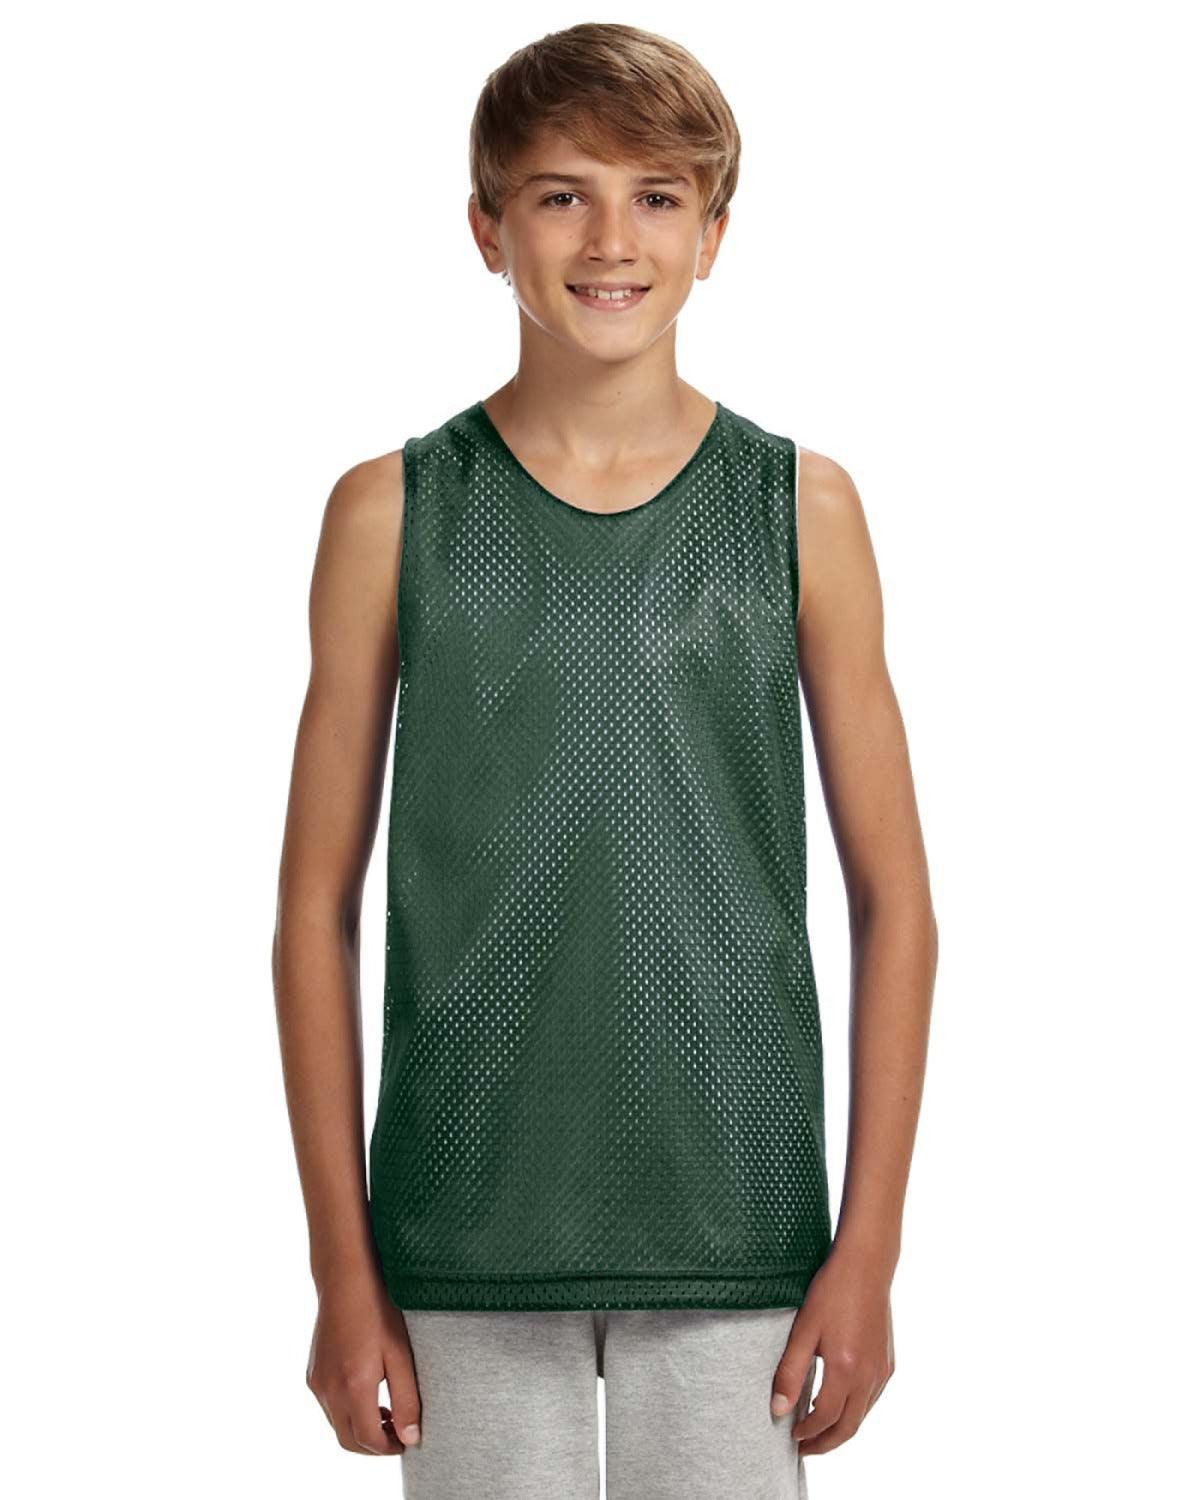 Custom Youth Tank Top Custom Tank Top Kids Youth Sizes Custom Text or  Graphic Graphic Tanks Girls' Tank Relaxed Fit Customized -  Ireland